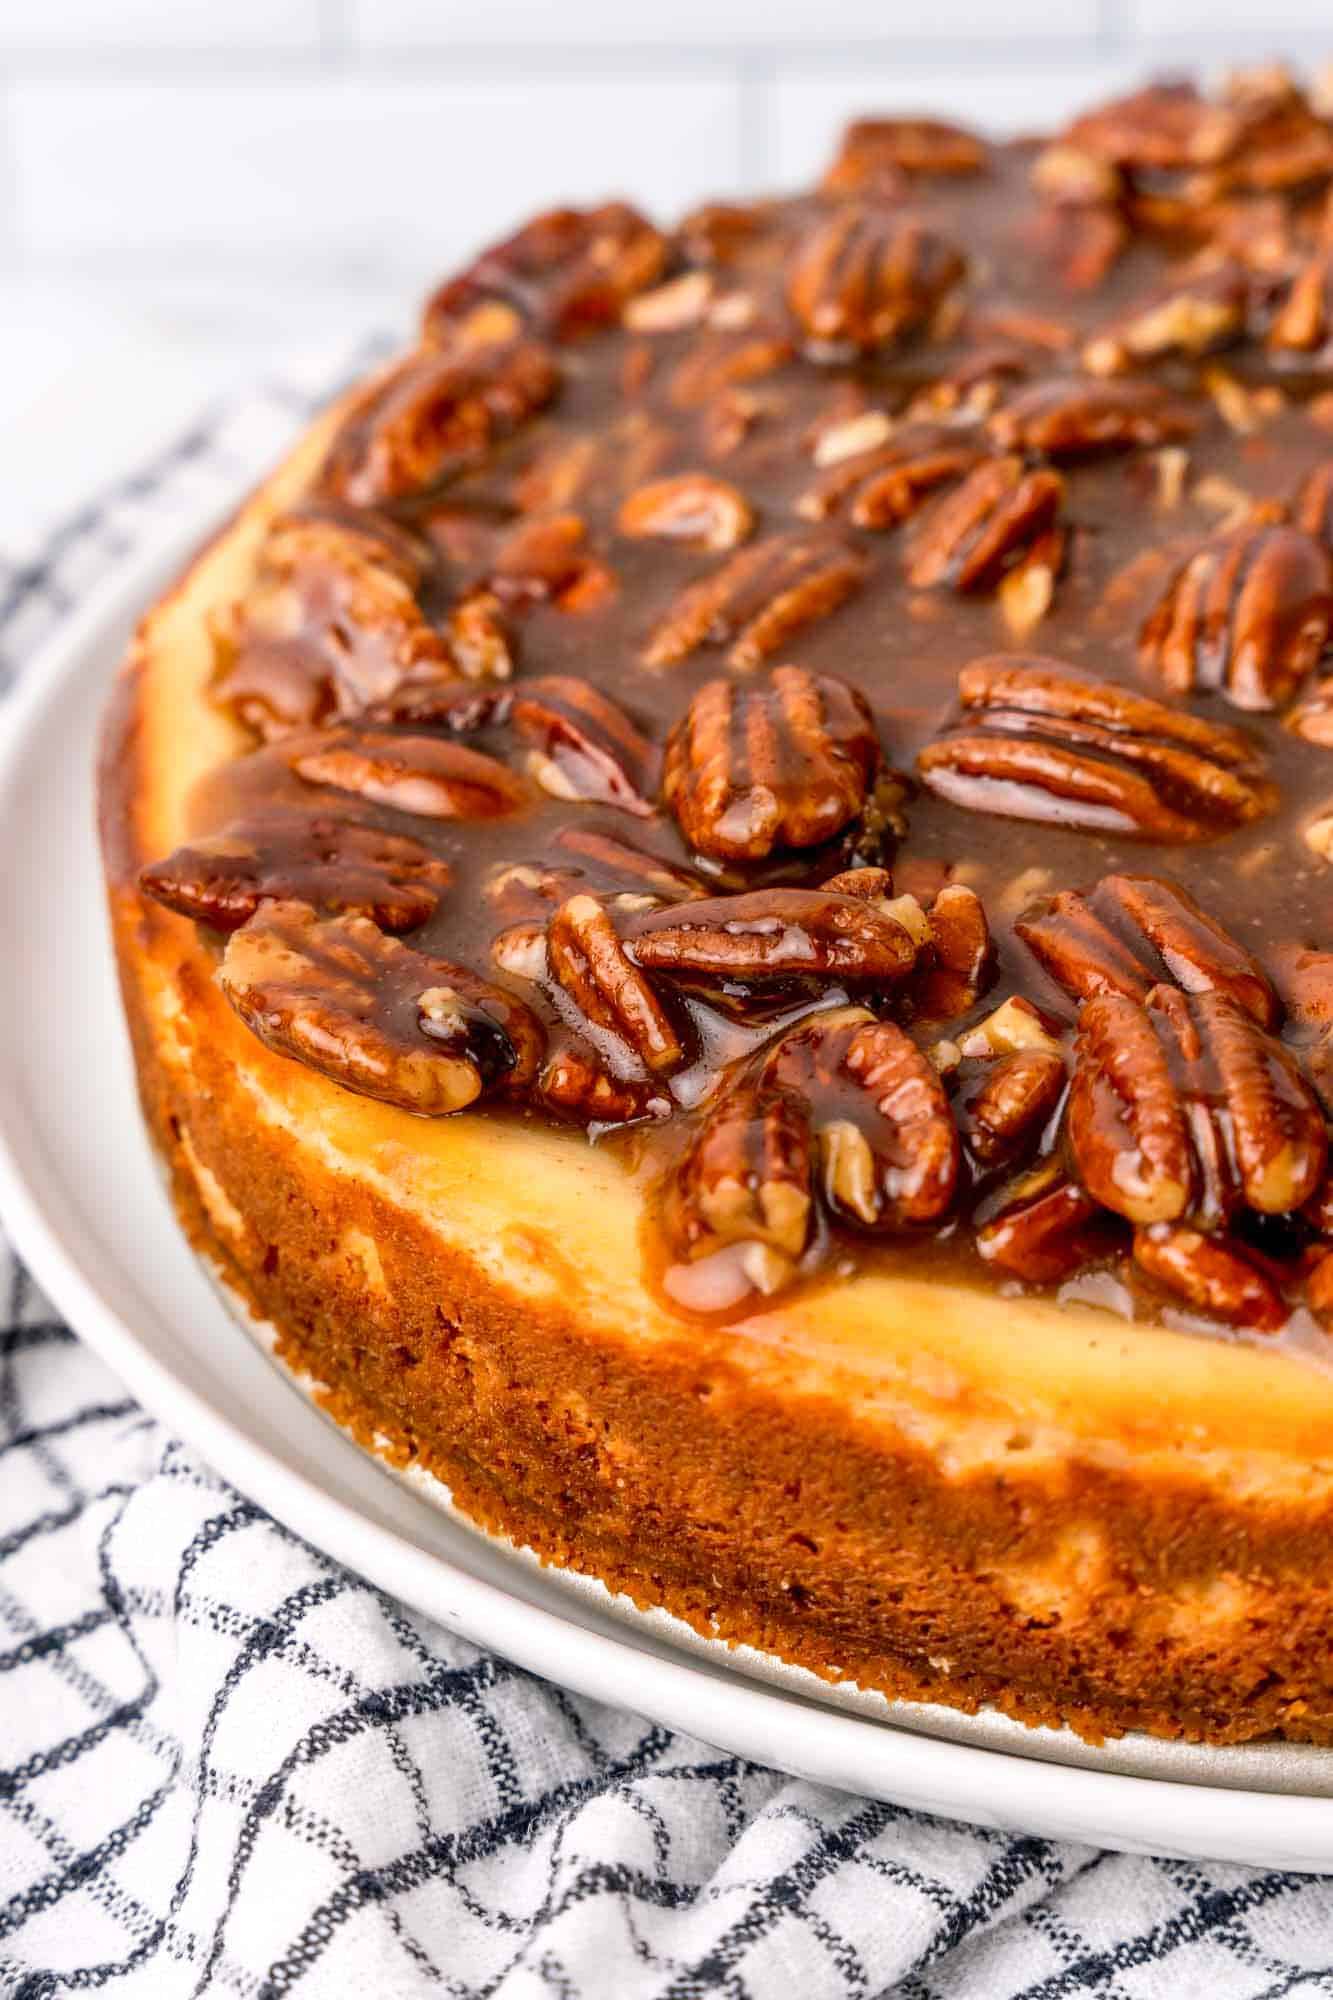 closeup view of a cheesecake with pecan pie topping, viewed from the side